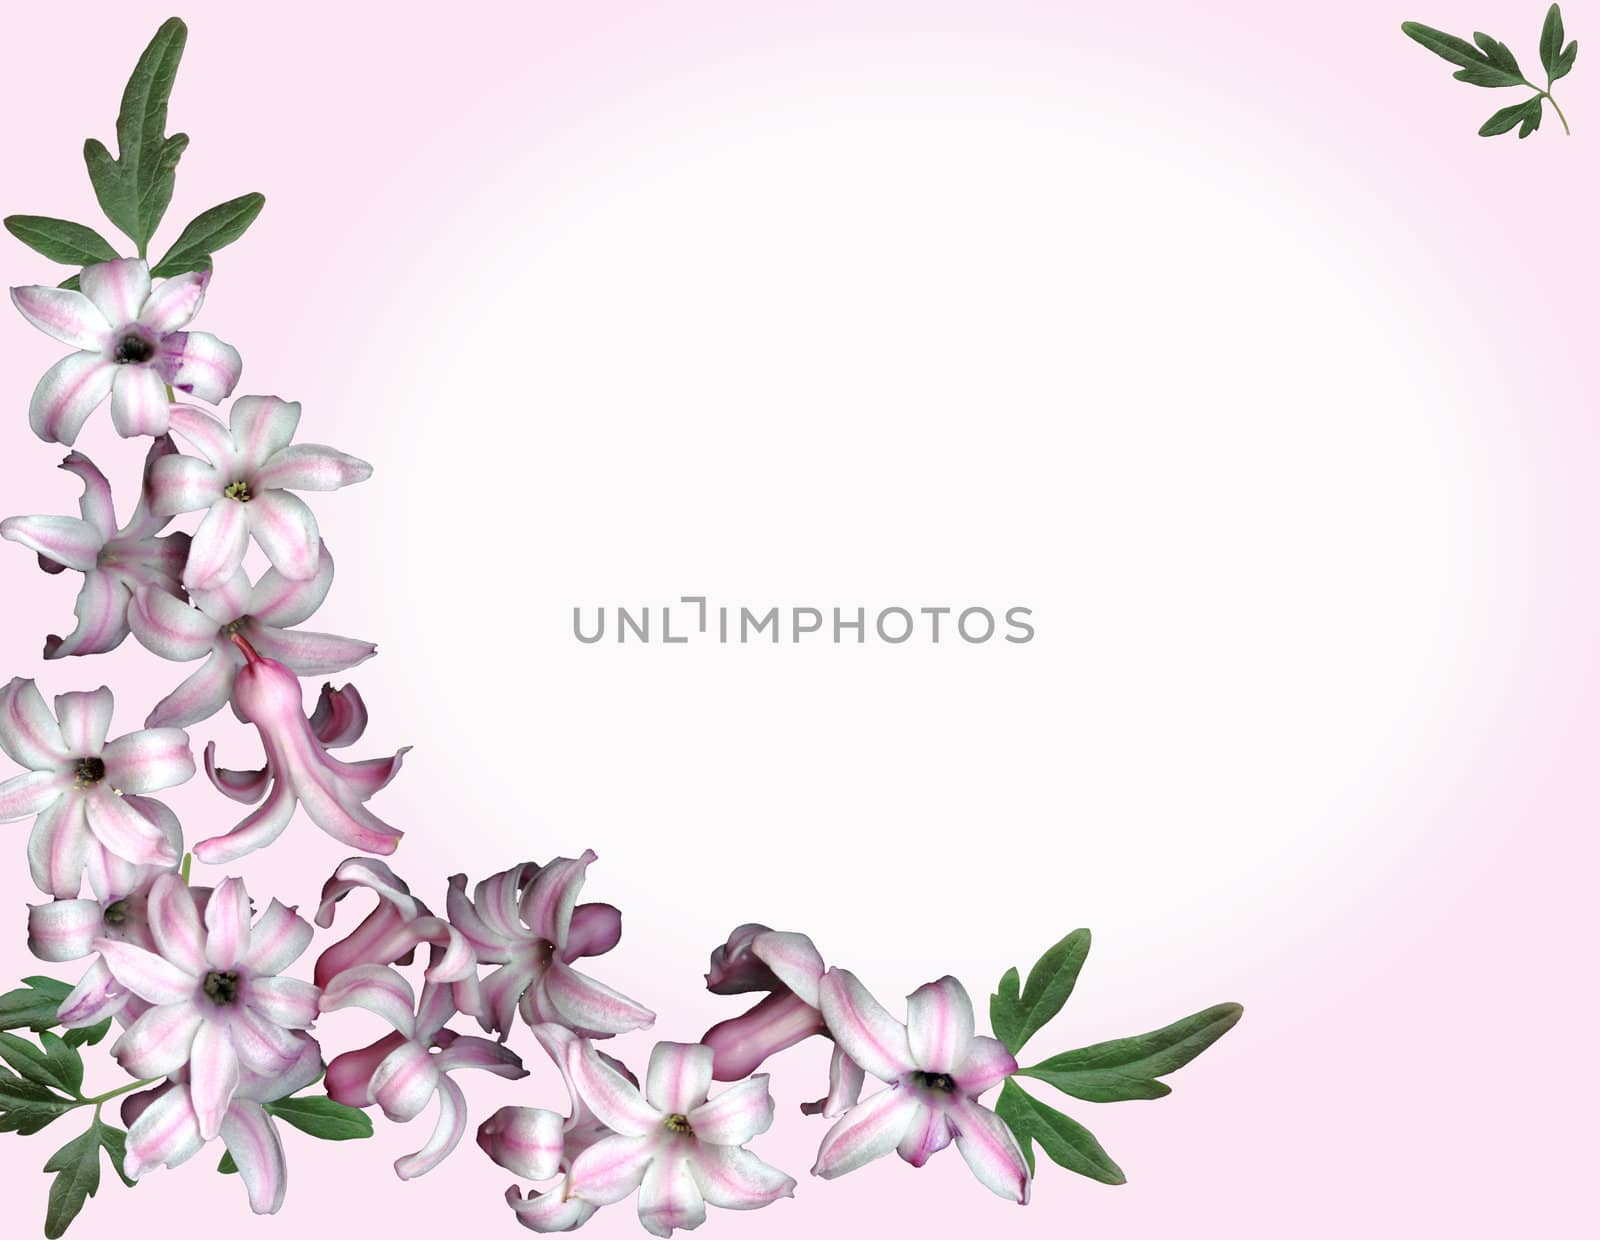 A background of pink flowers and foliage for your message